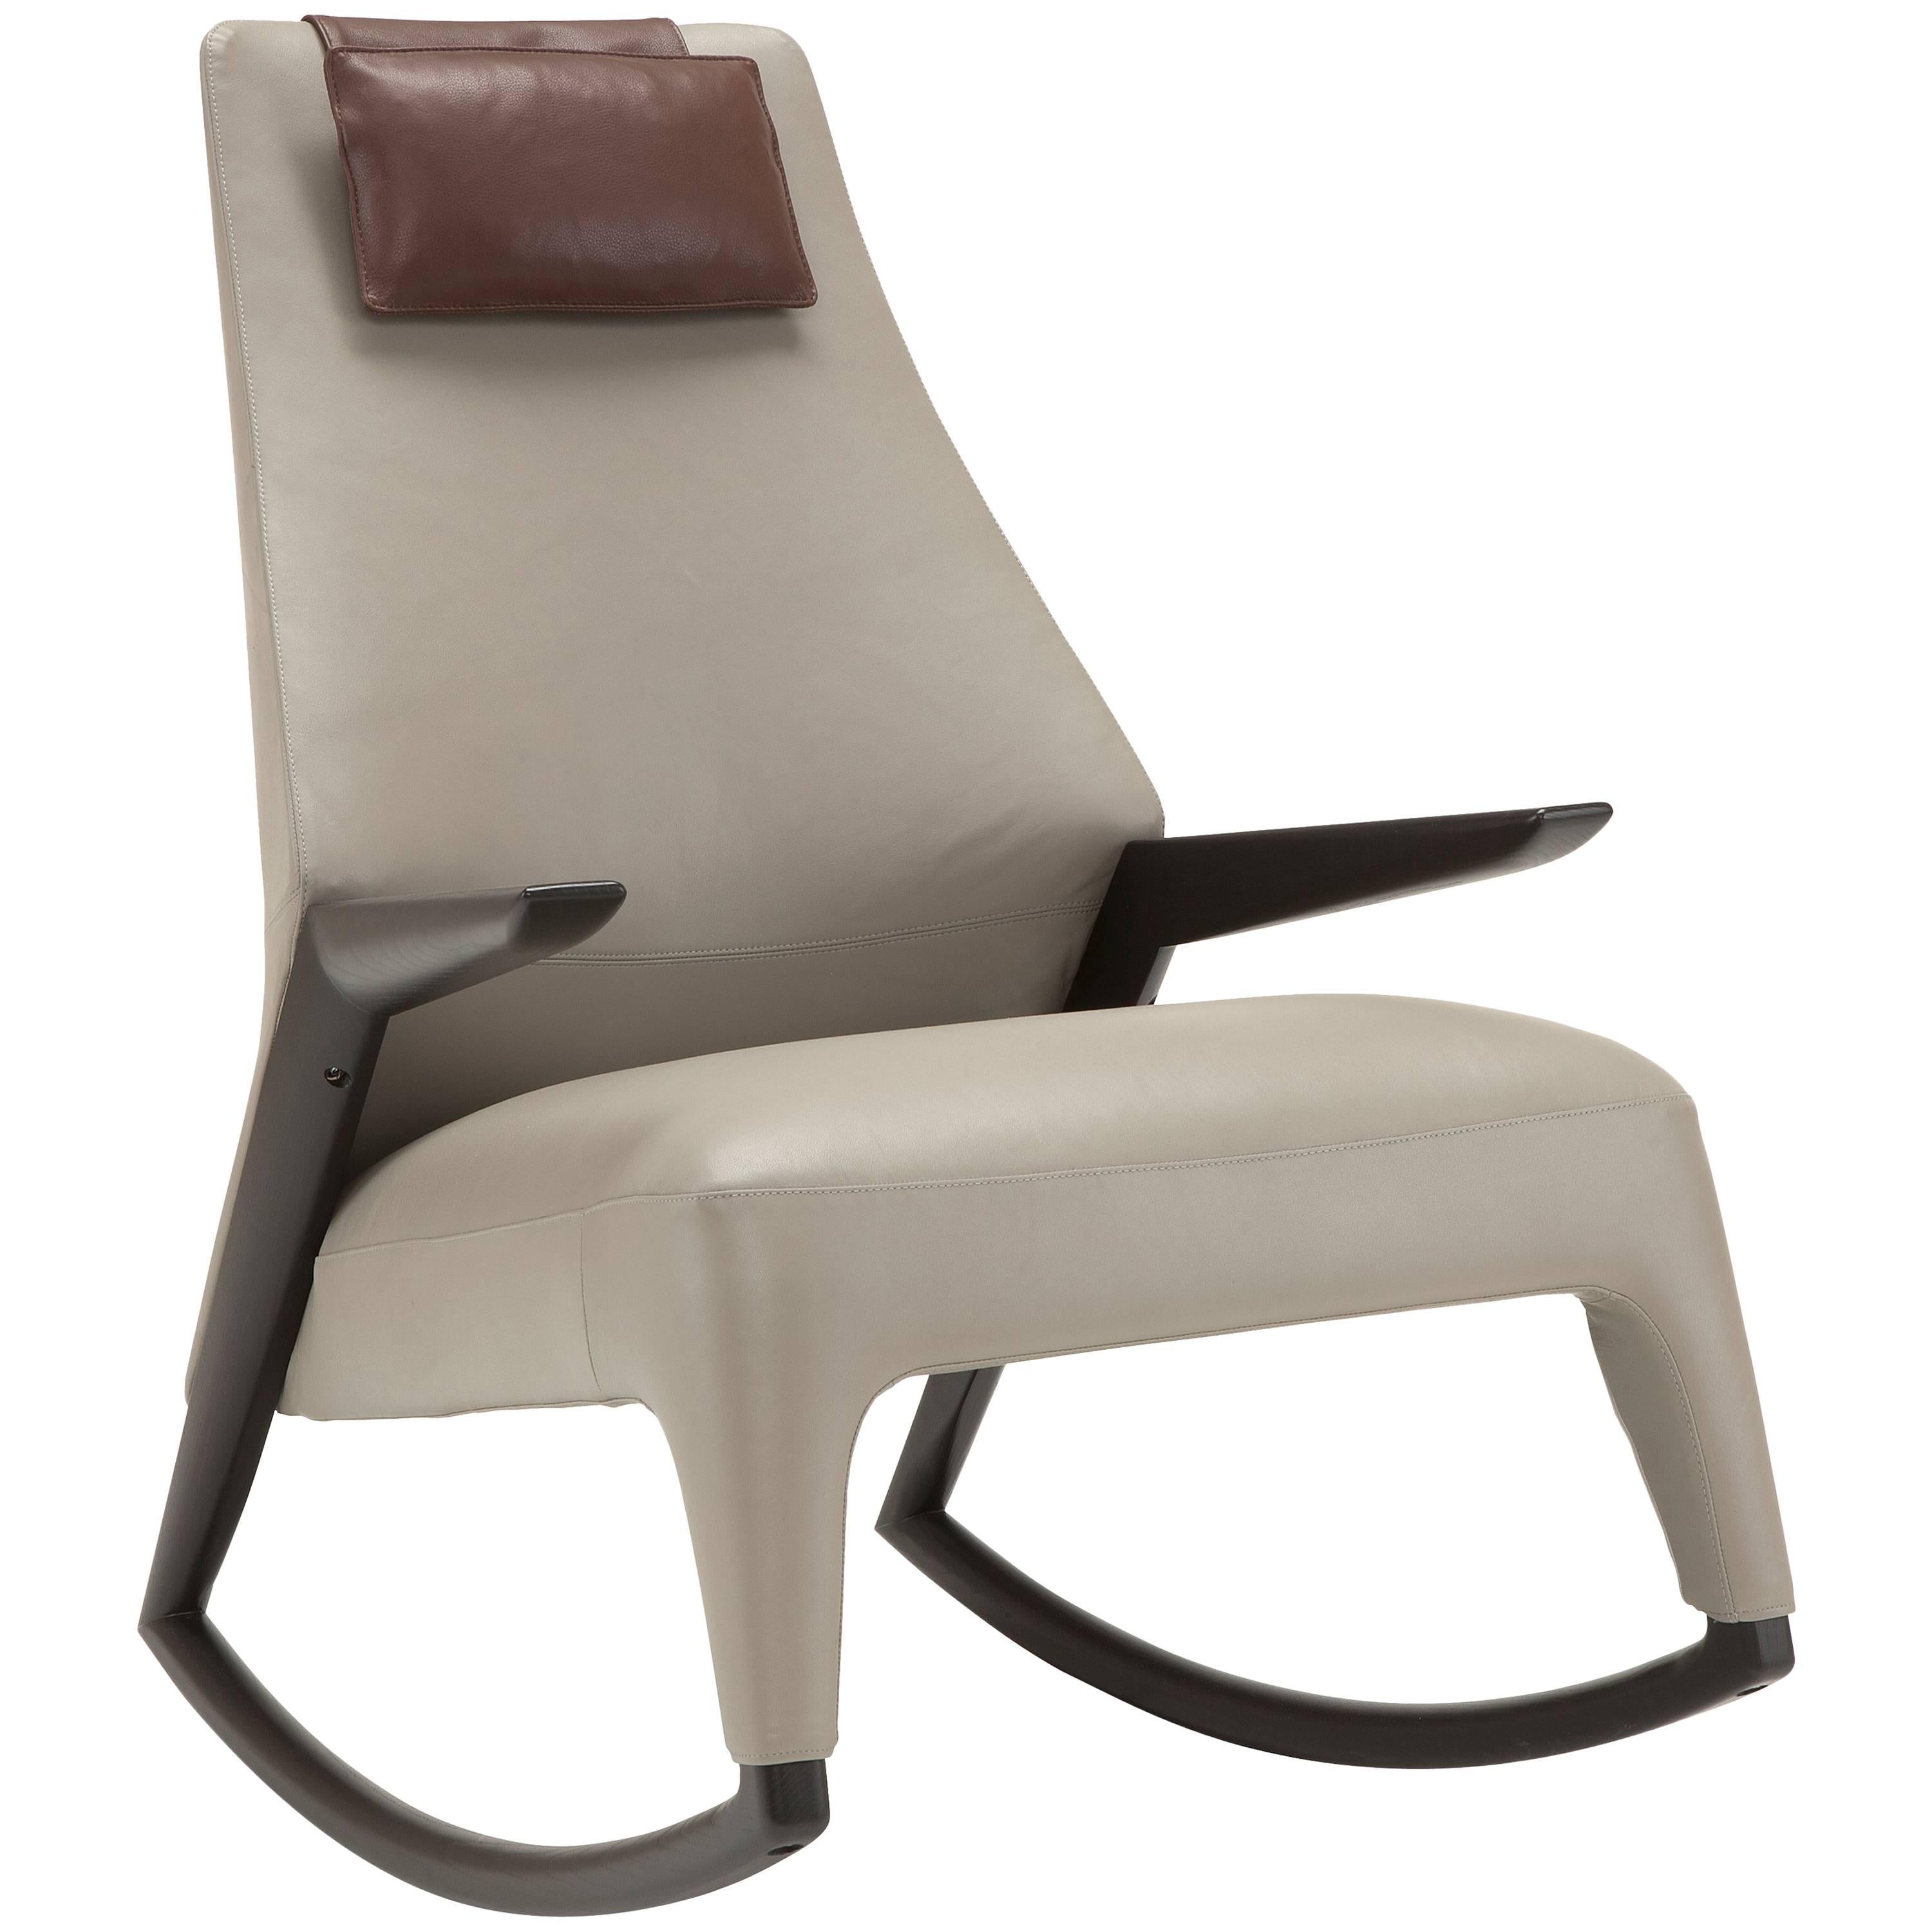 Coccolo Armchair in Taupe by Maurizio Marconato & Terry Zappa For Sale